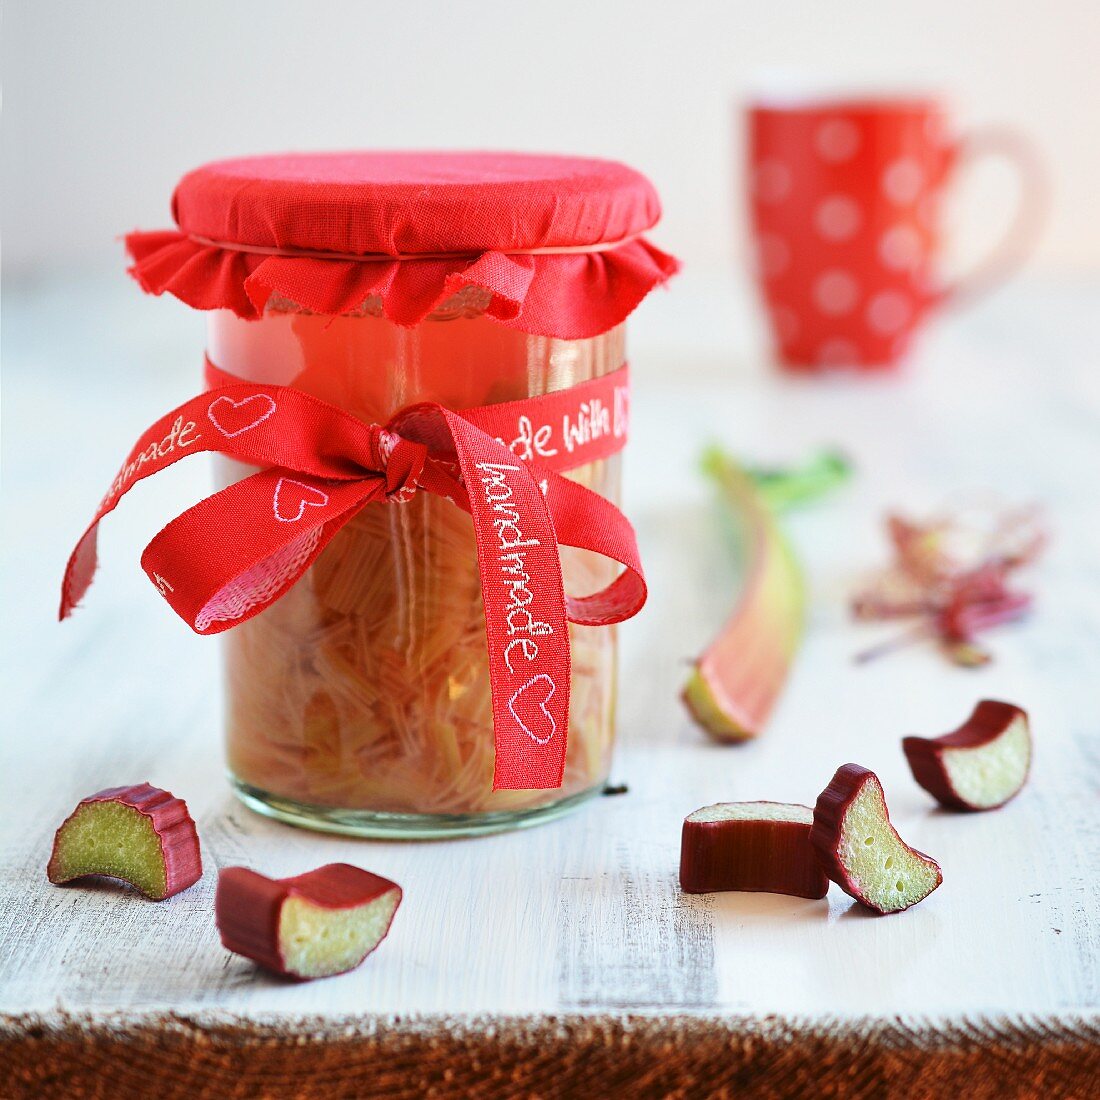 A jar of homemade rhubarb compote with a red bow